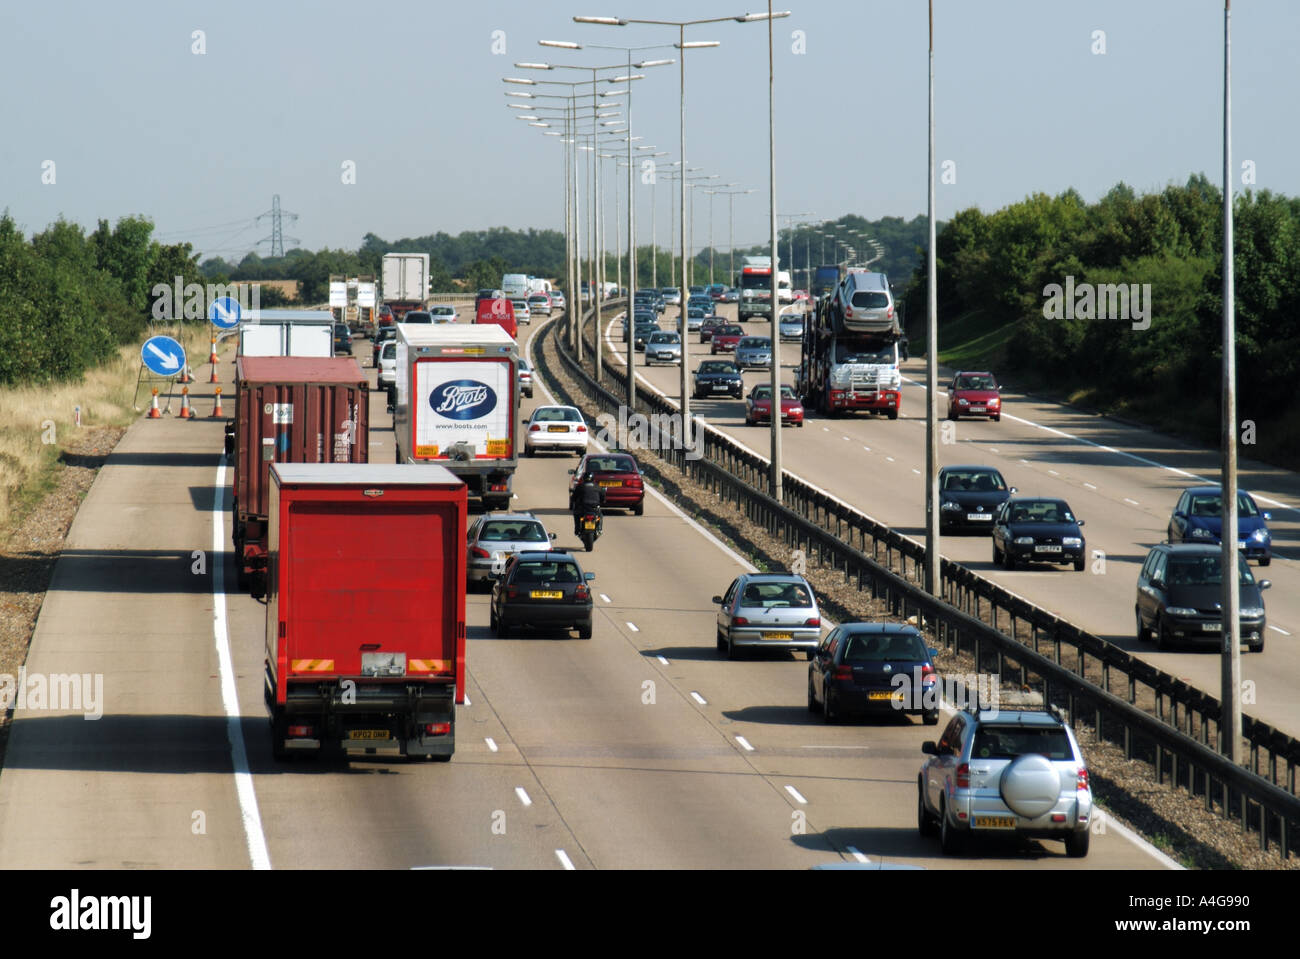 Back & front view from above on lorries trucks car traffic driving on busy three lane concrete motorway & road hard shoulder steel crash barrier UK Stock Photo